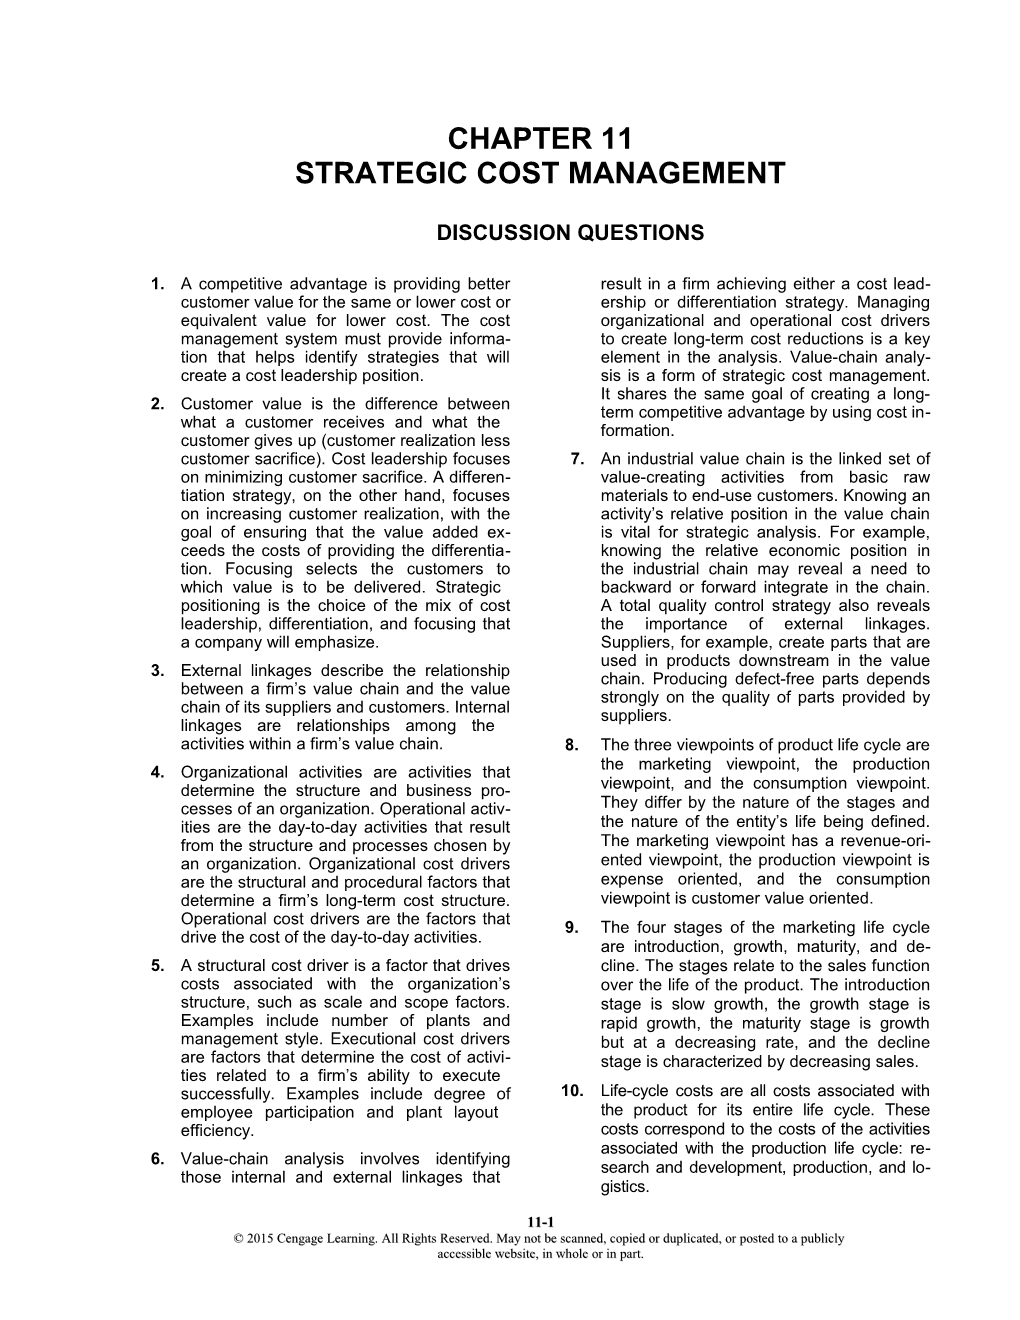 Chapter 13: Strategic Cost Management